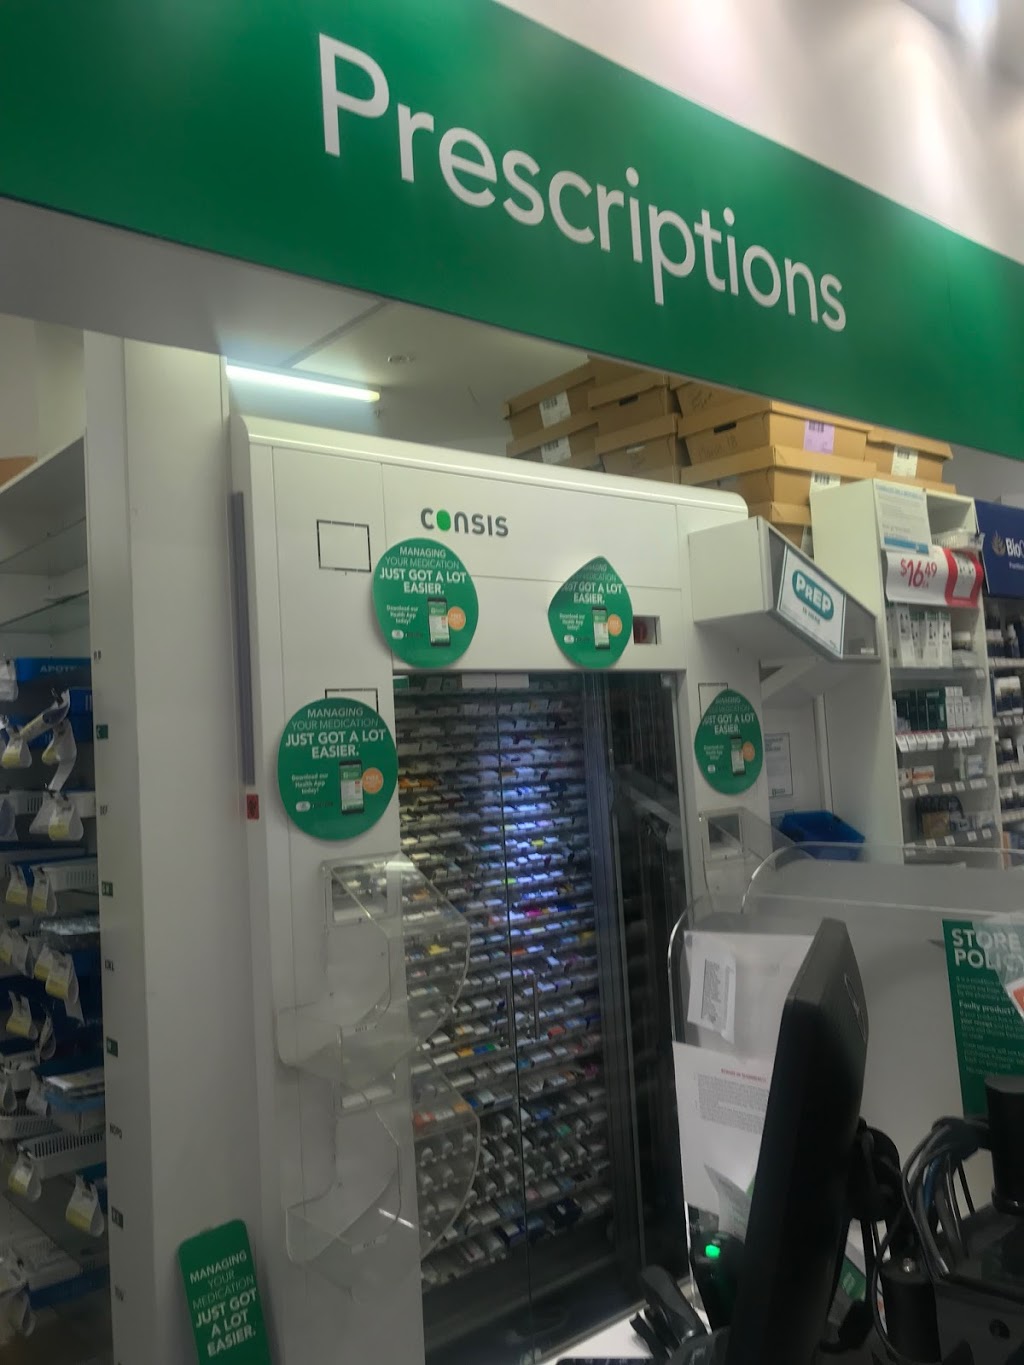 TerryWhite Chemmart Chatswood Chase | pharmacy | Shop B-046 Chatswood Chase Shopping Centre, 345 Victoria Ave, Chatswood NSW 2067, Australia | 0294192800 OR +61 2 9419 2800